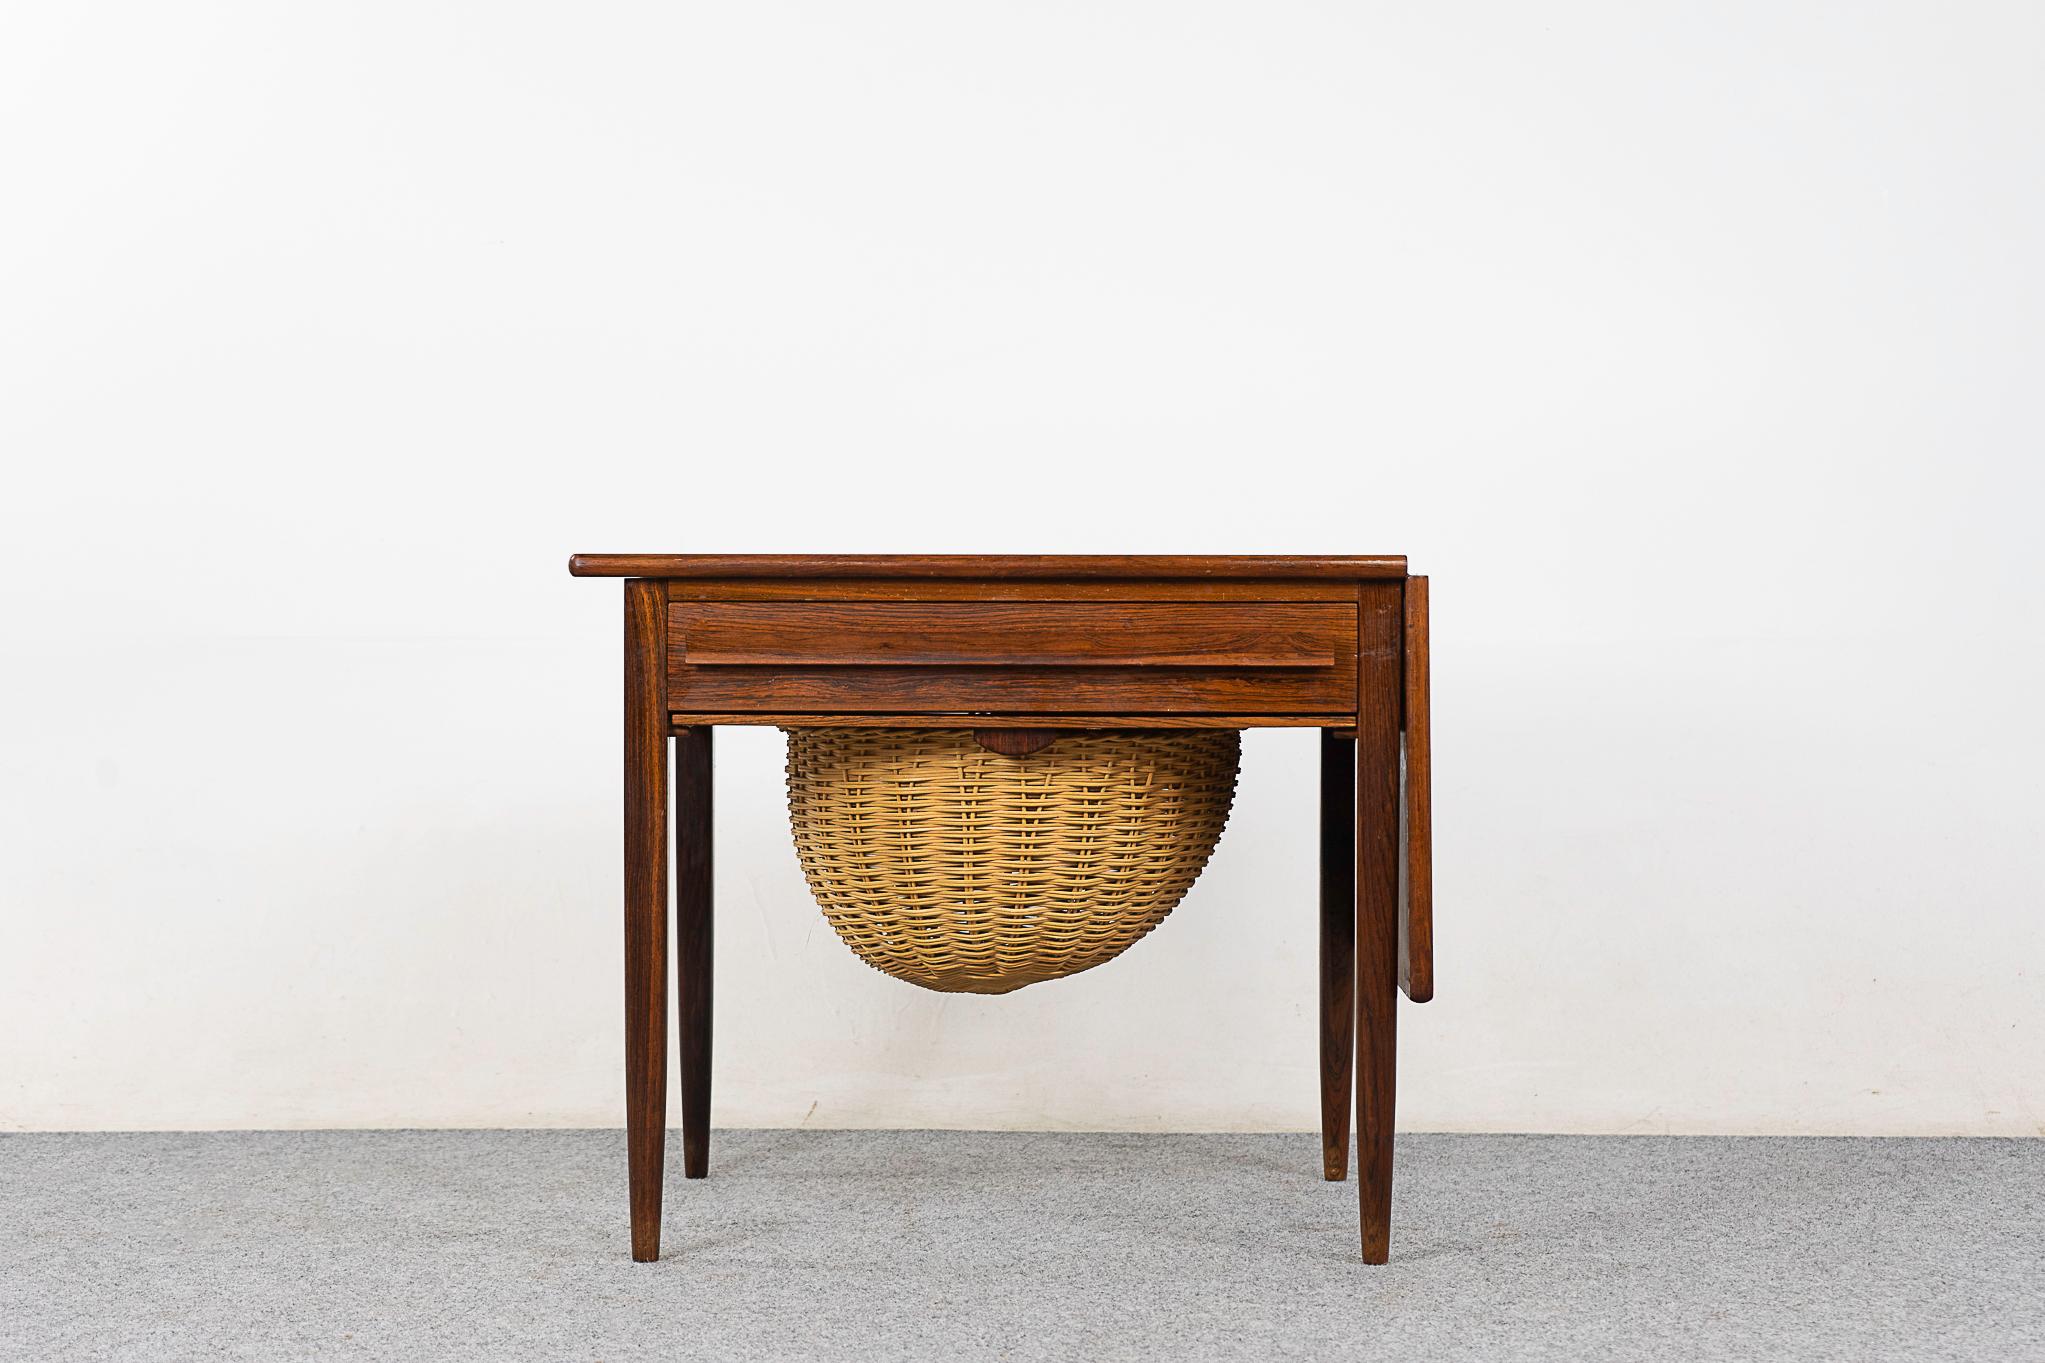 Rosewood sewing table by Johannes Andersen, circa 1960's. Sweet sewing table, can double as a perfect end table or accent piece. Handy drawer with fitted interior, original woven basket sides out for sleek storage. 

Unrestored item, some marks